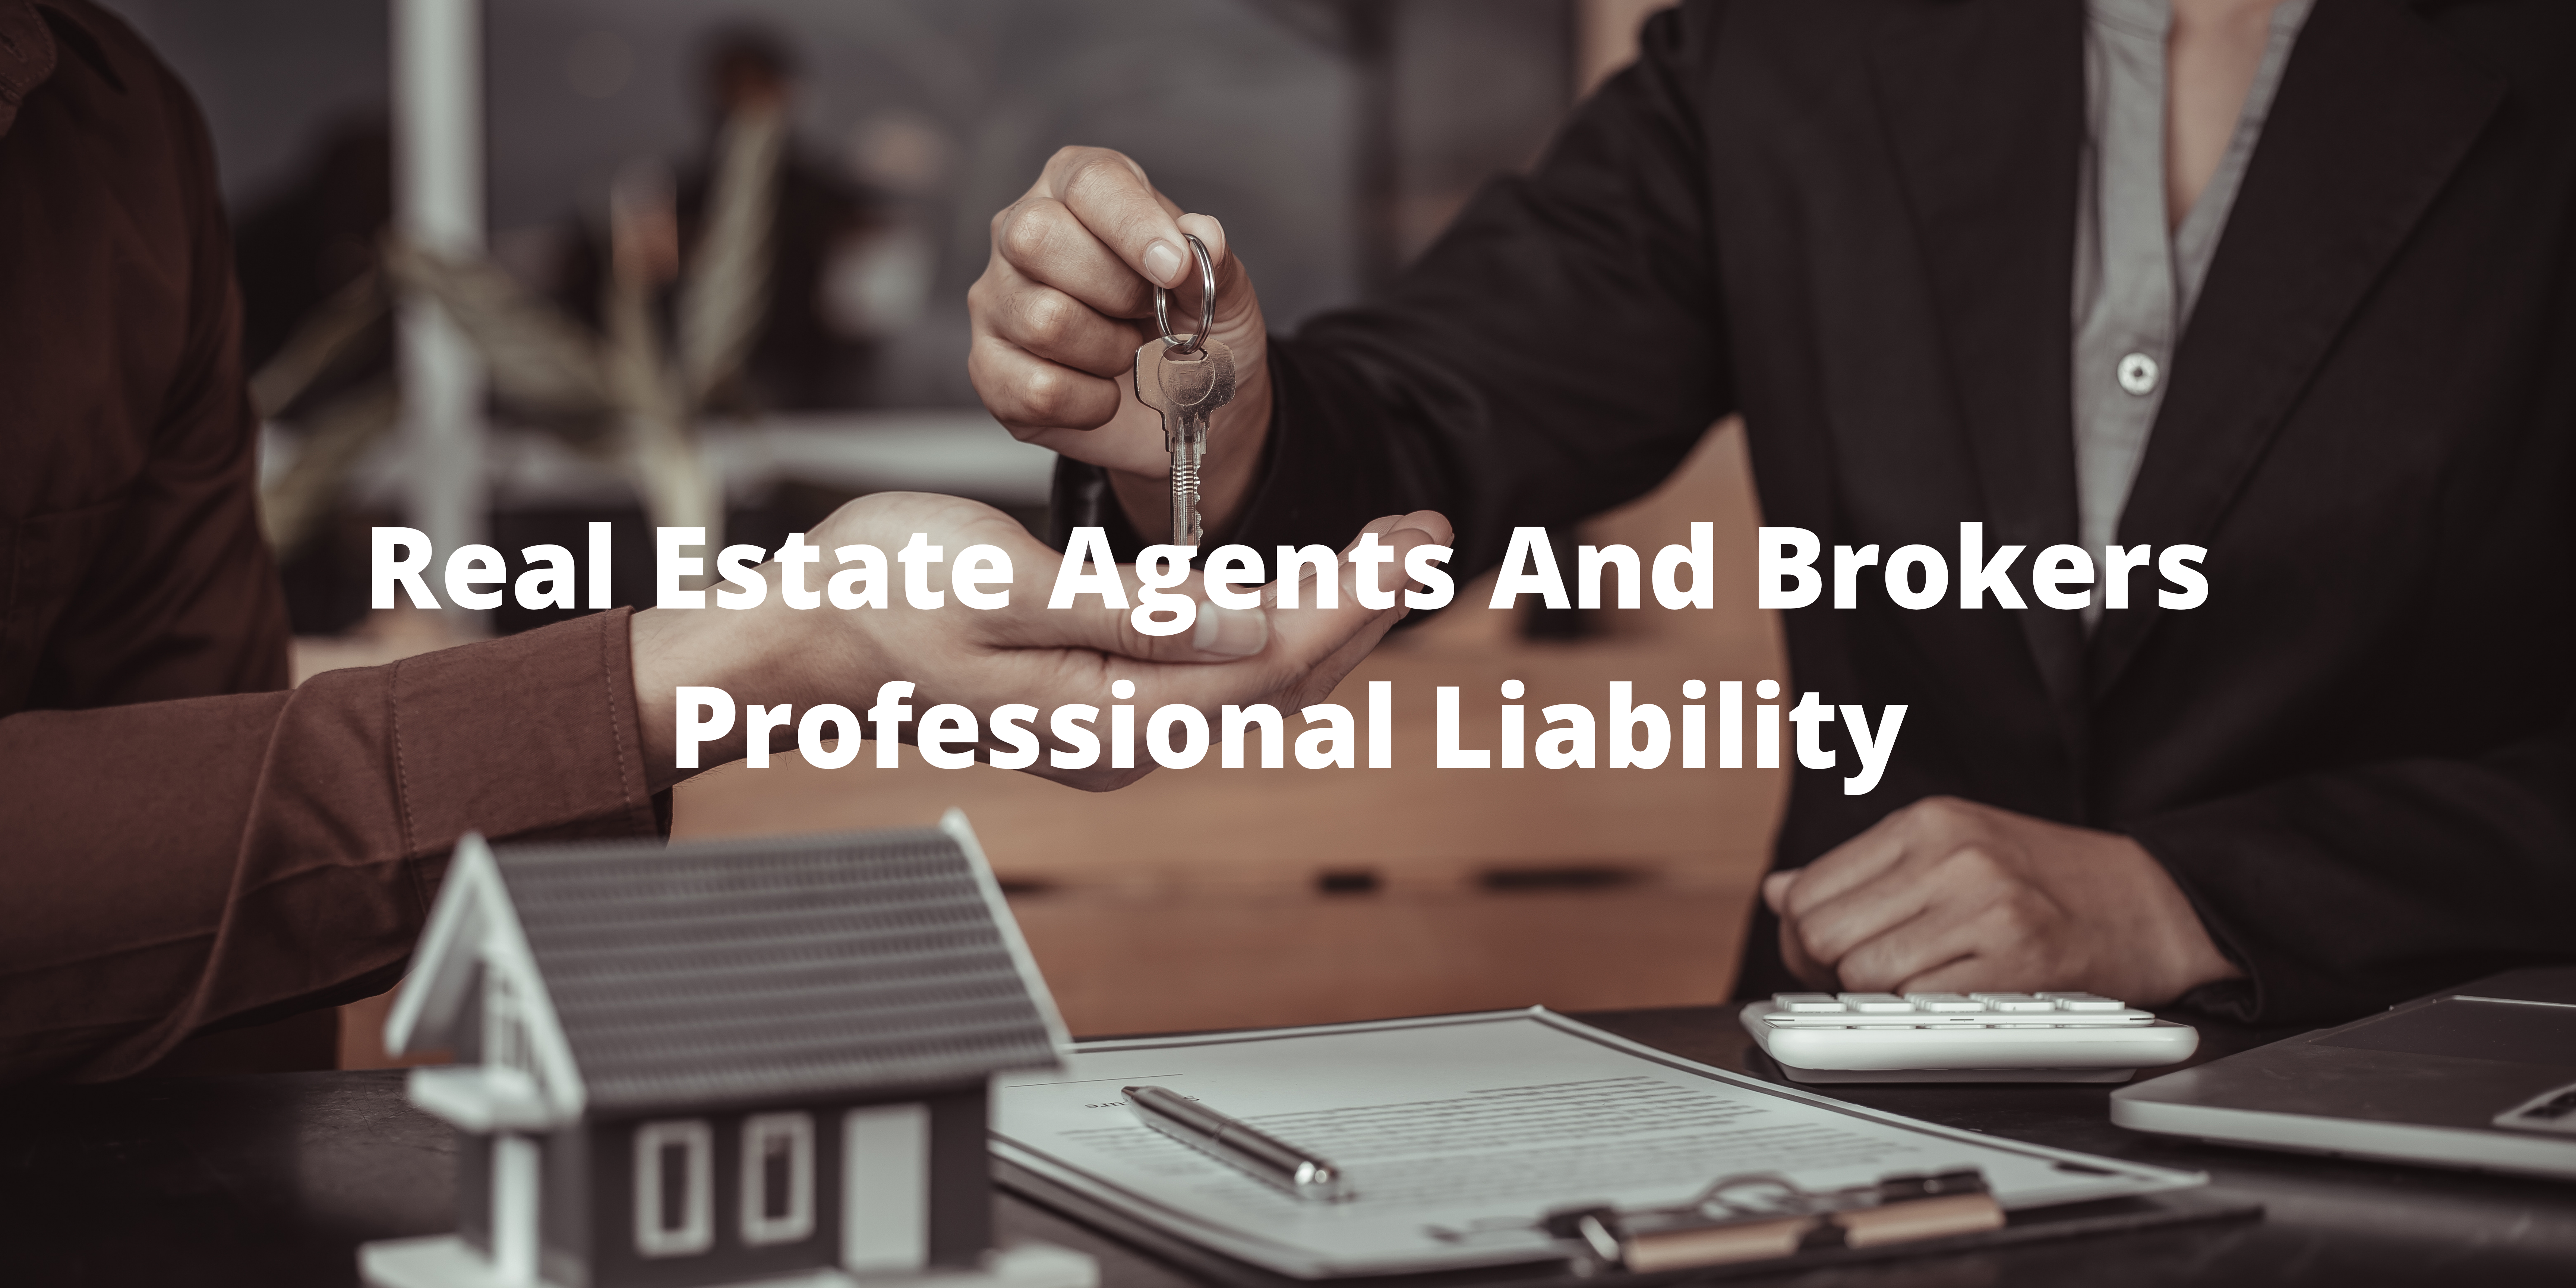 Real Estate Agents And Brokers Professional Liability